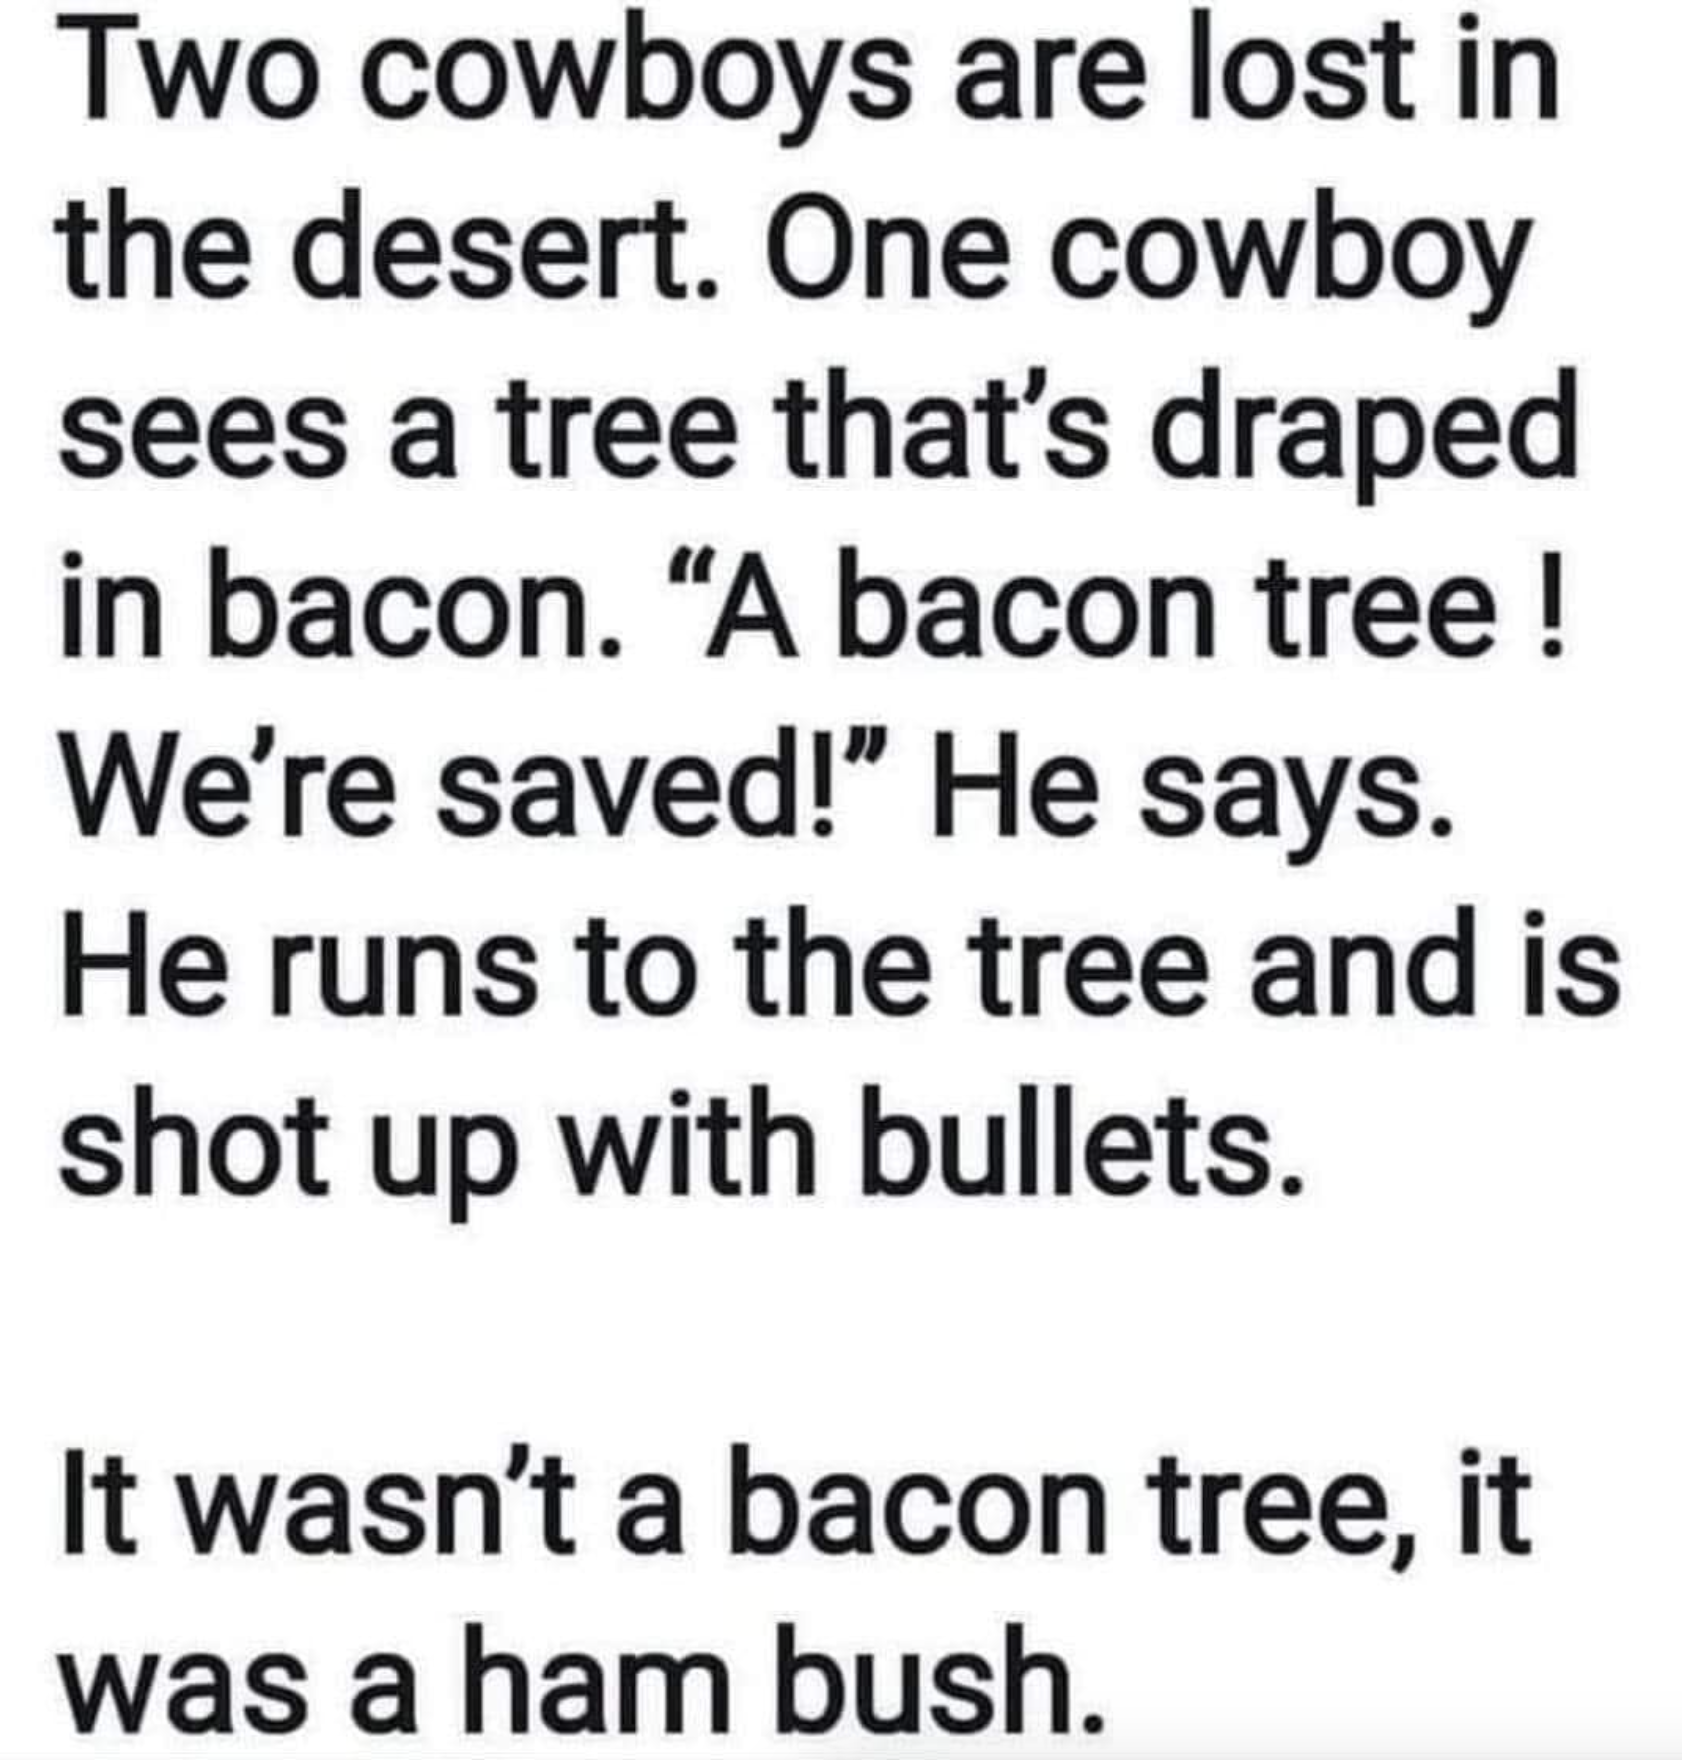 steps taken to control soil erosion in hilly areas - Two cowboys are lost in the desert. One cowboy sees a tree that's draped in bacon. A bacon tree ! We're saved!" He says. He runs to the tree and is shot up with bullets. It wasn't a bacon tree, it was a